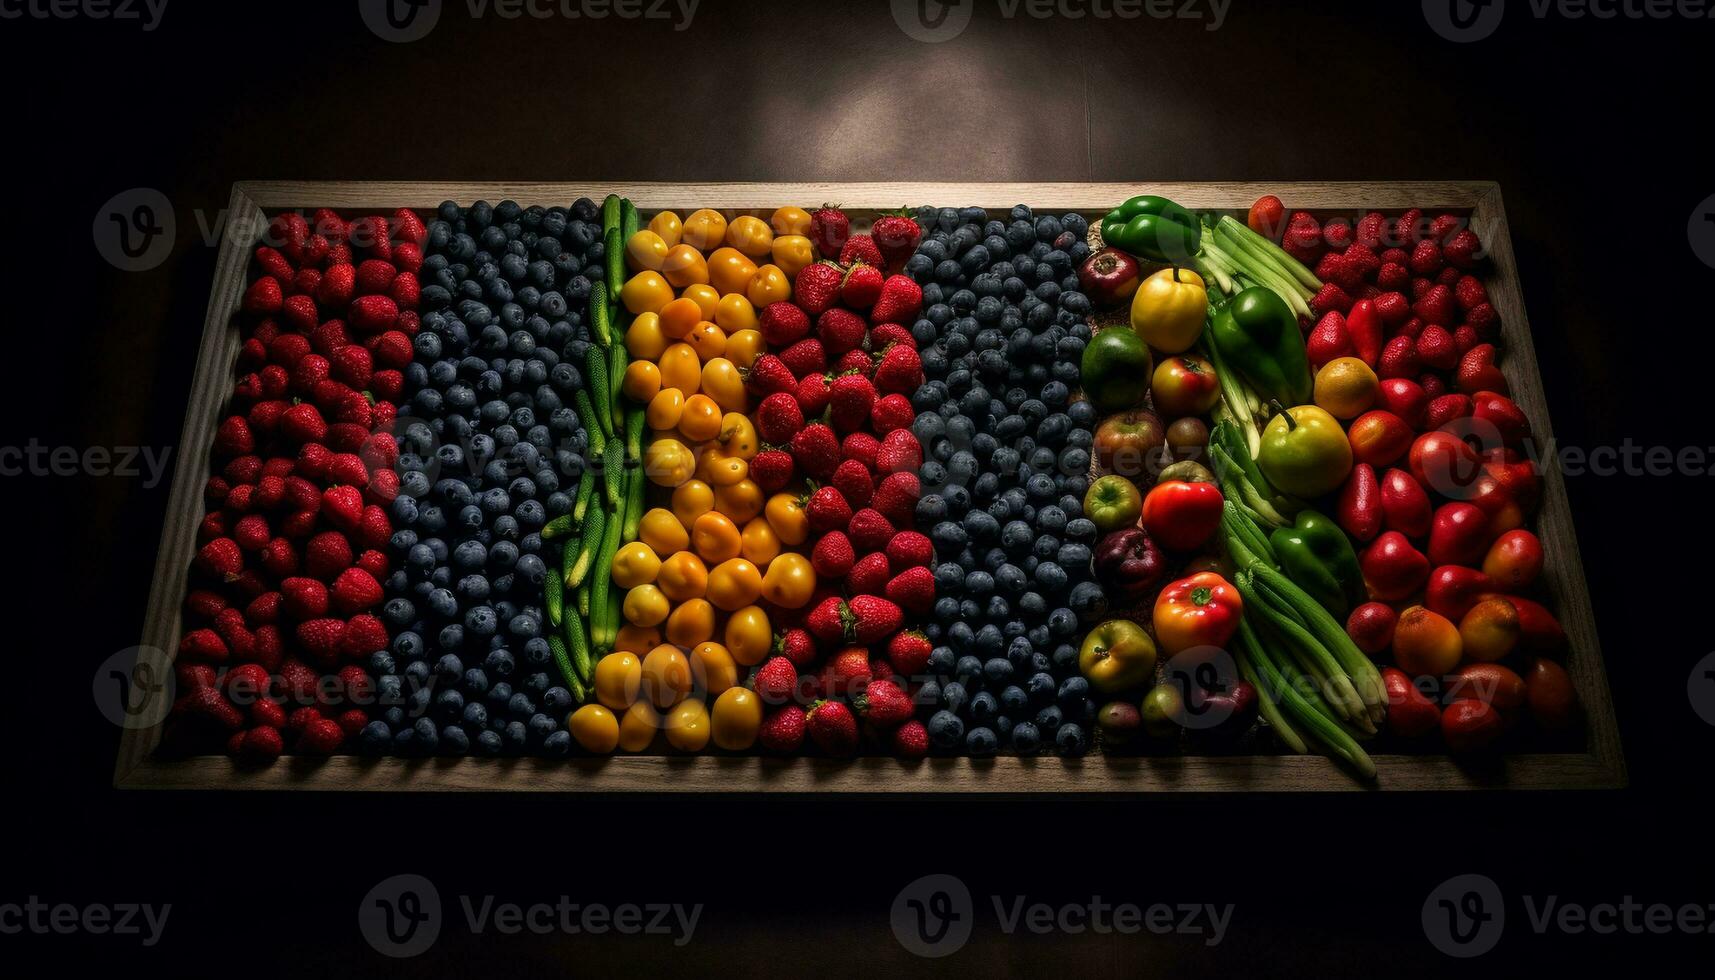 Healthy berry fruit bowl, a gourmet delight generated by AI photo